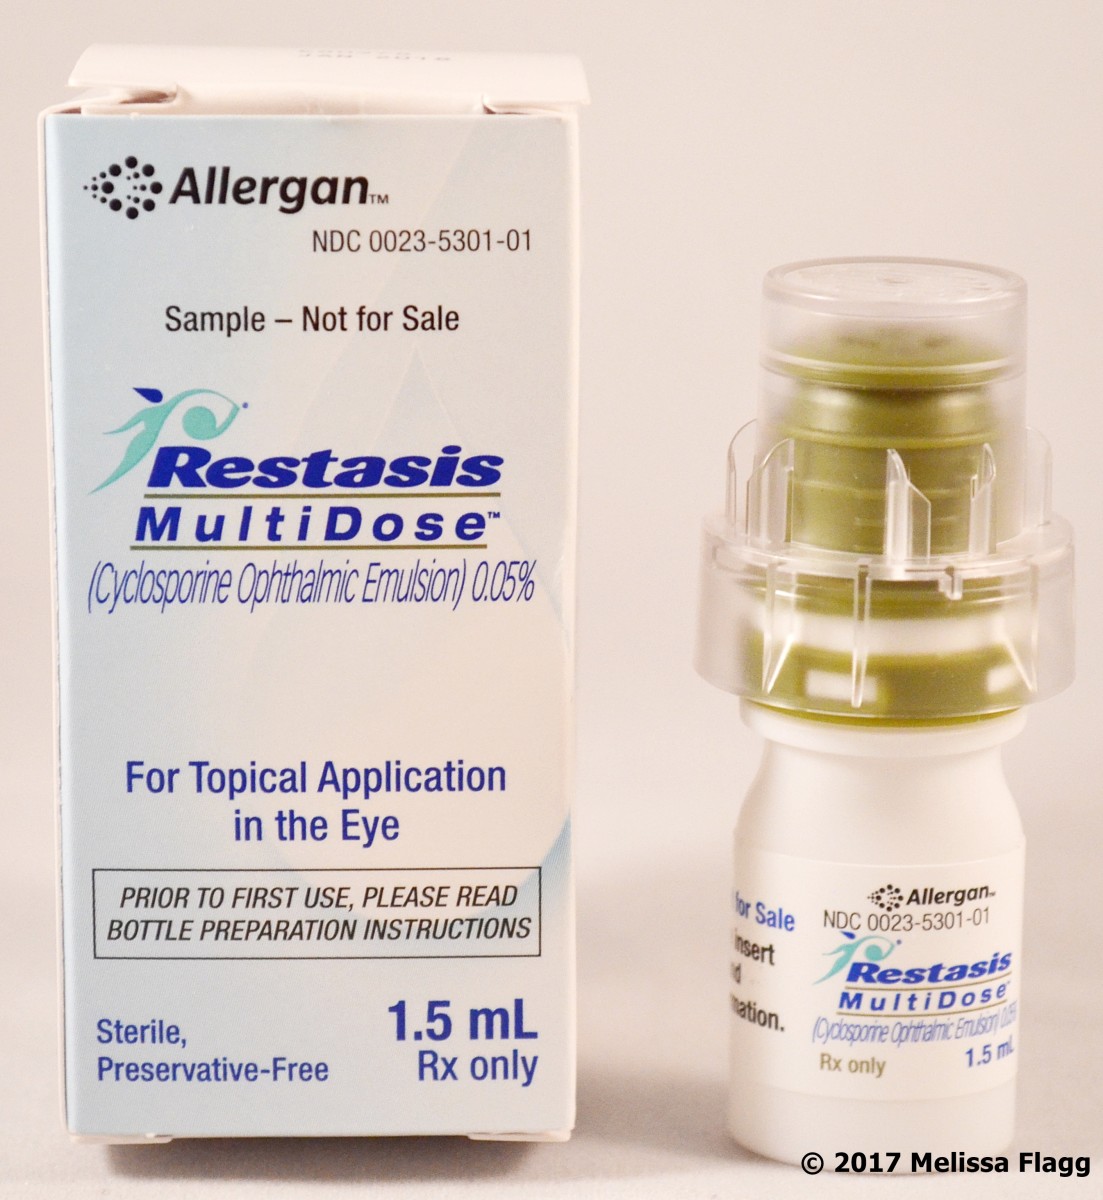 Restasis now comes in a preservative-free multidose eye drop bottle instead of just the single-dose vials above.